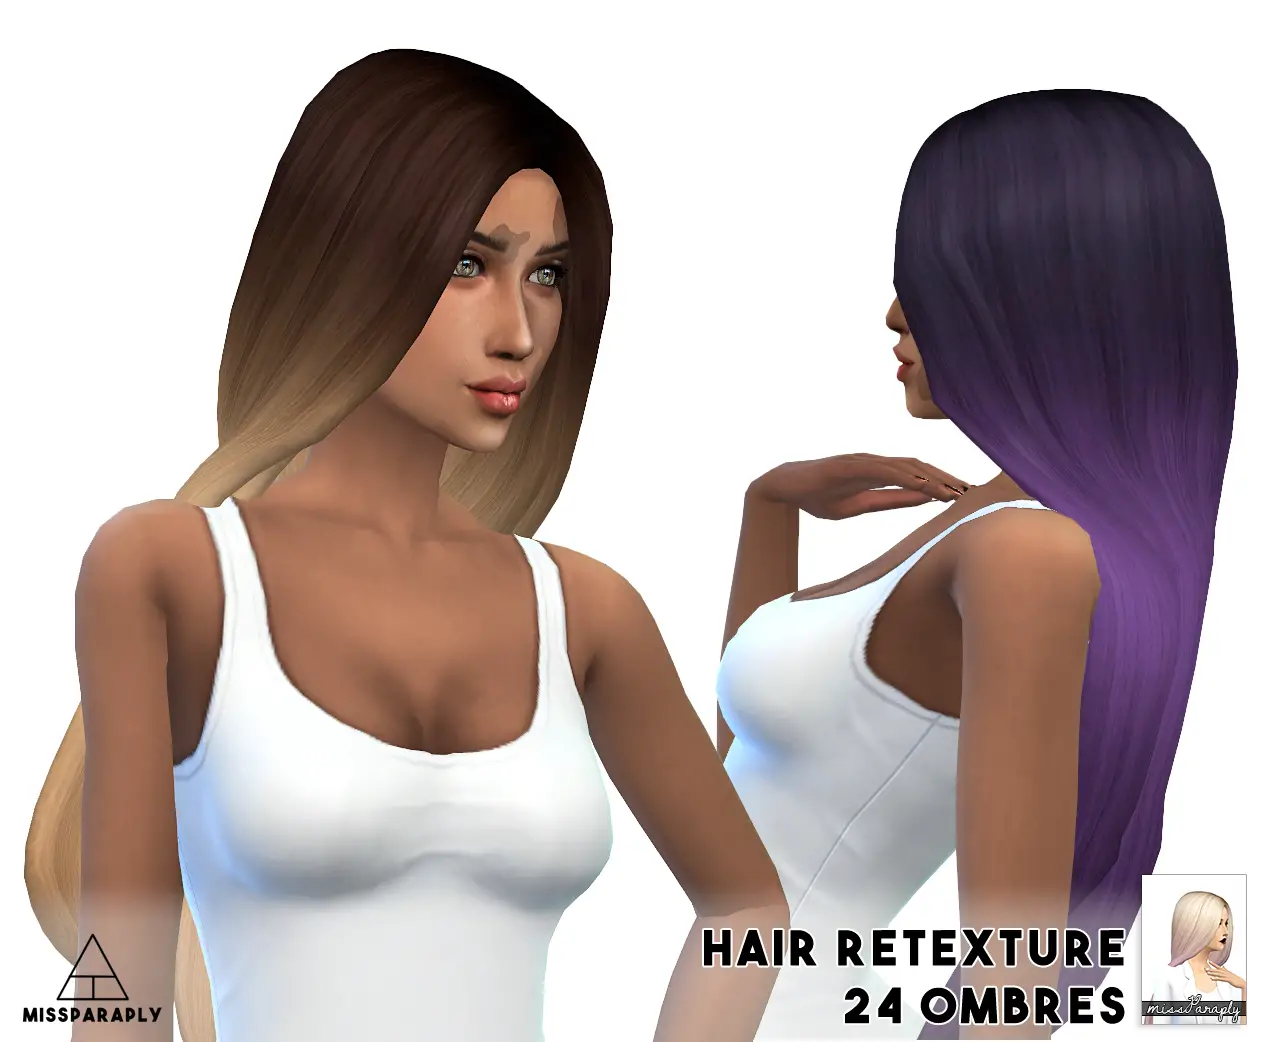 Sims 4 Hairs Miss Paraply 10 000 Followers Appreciation T